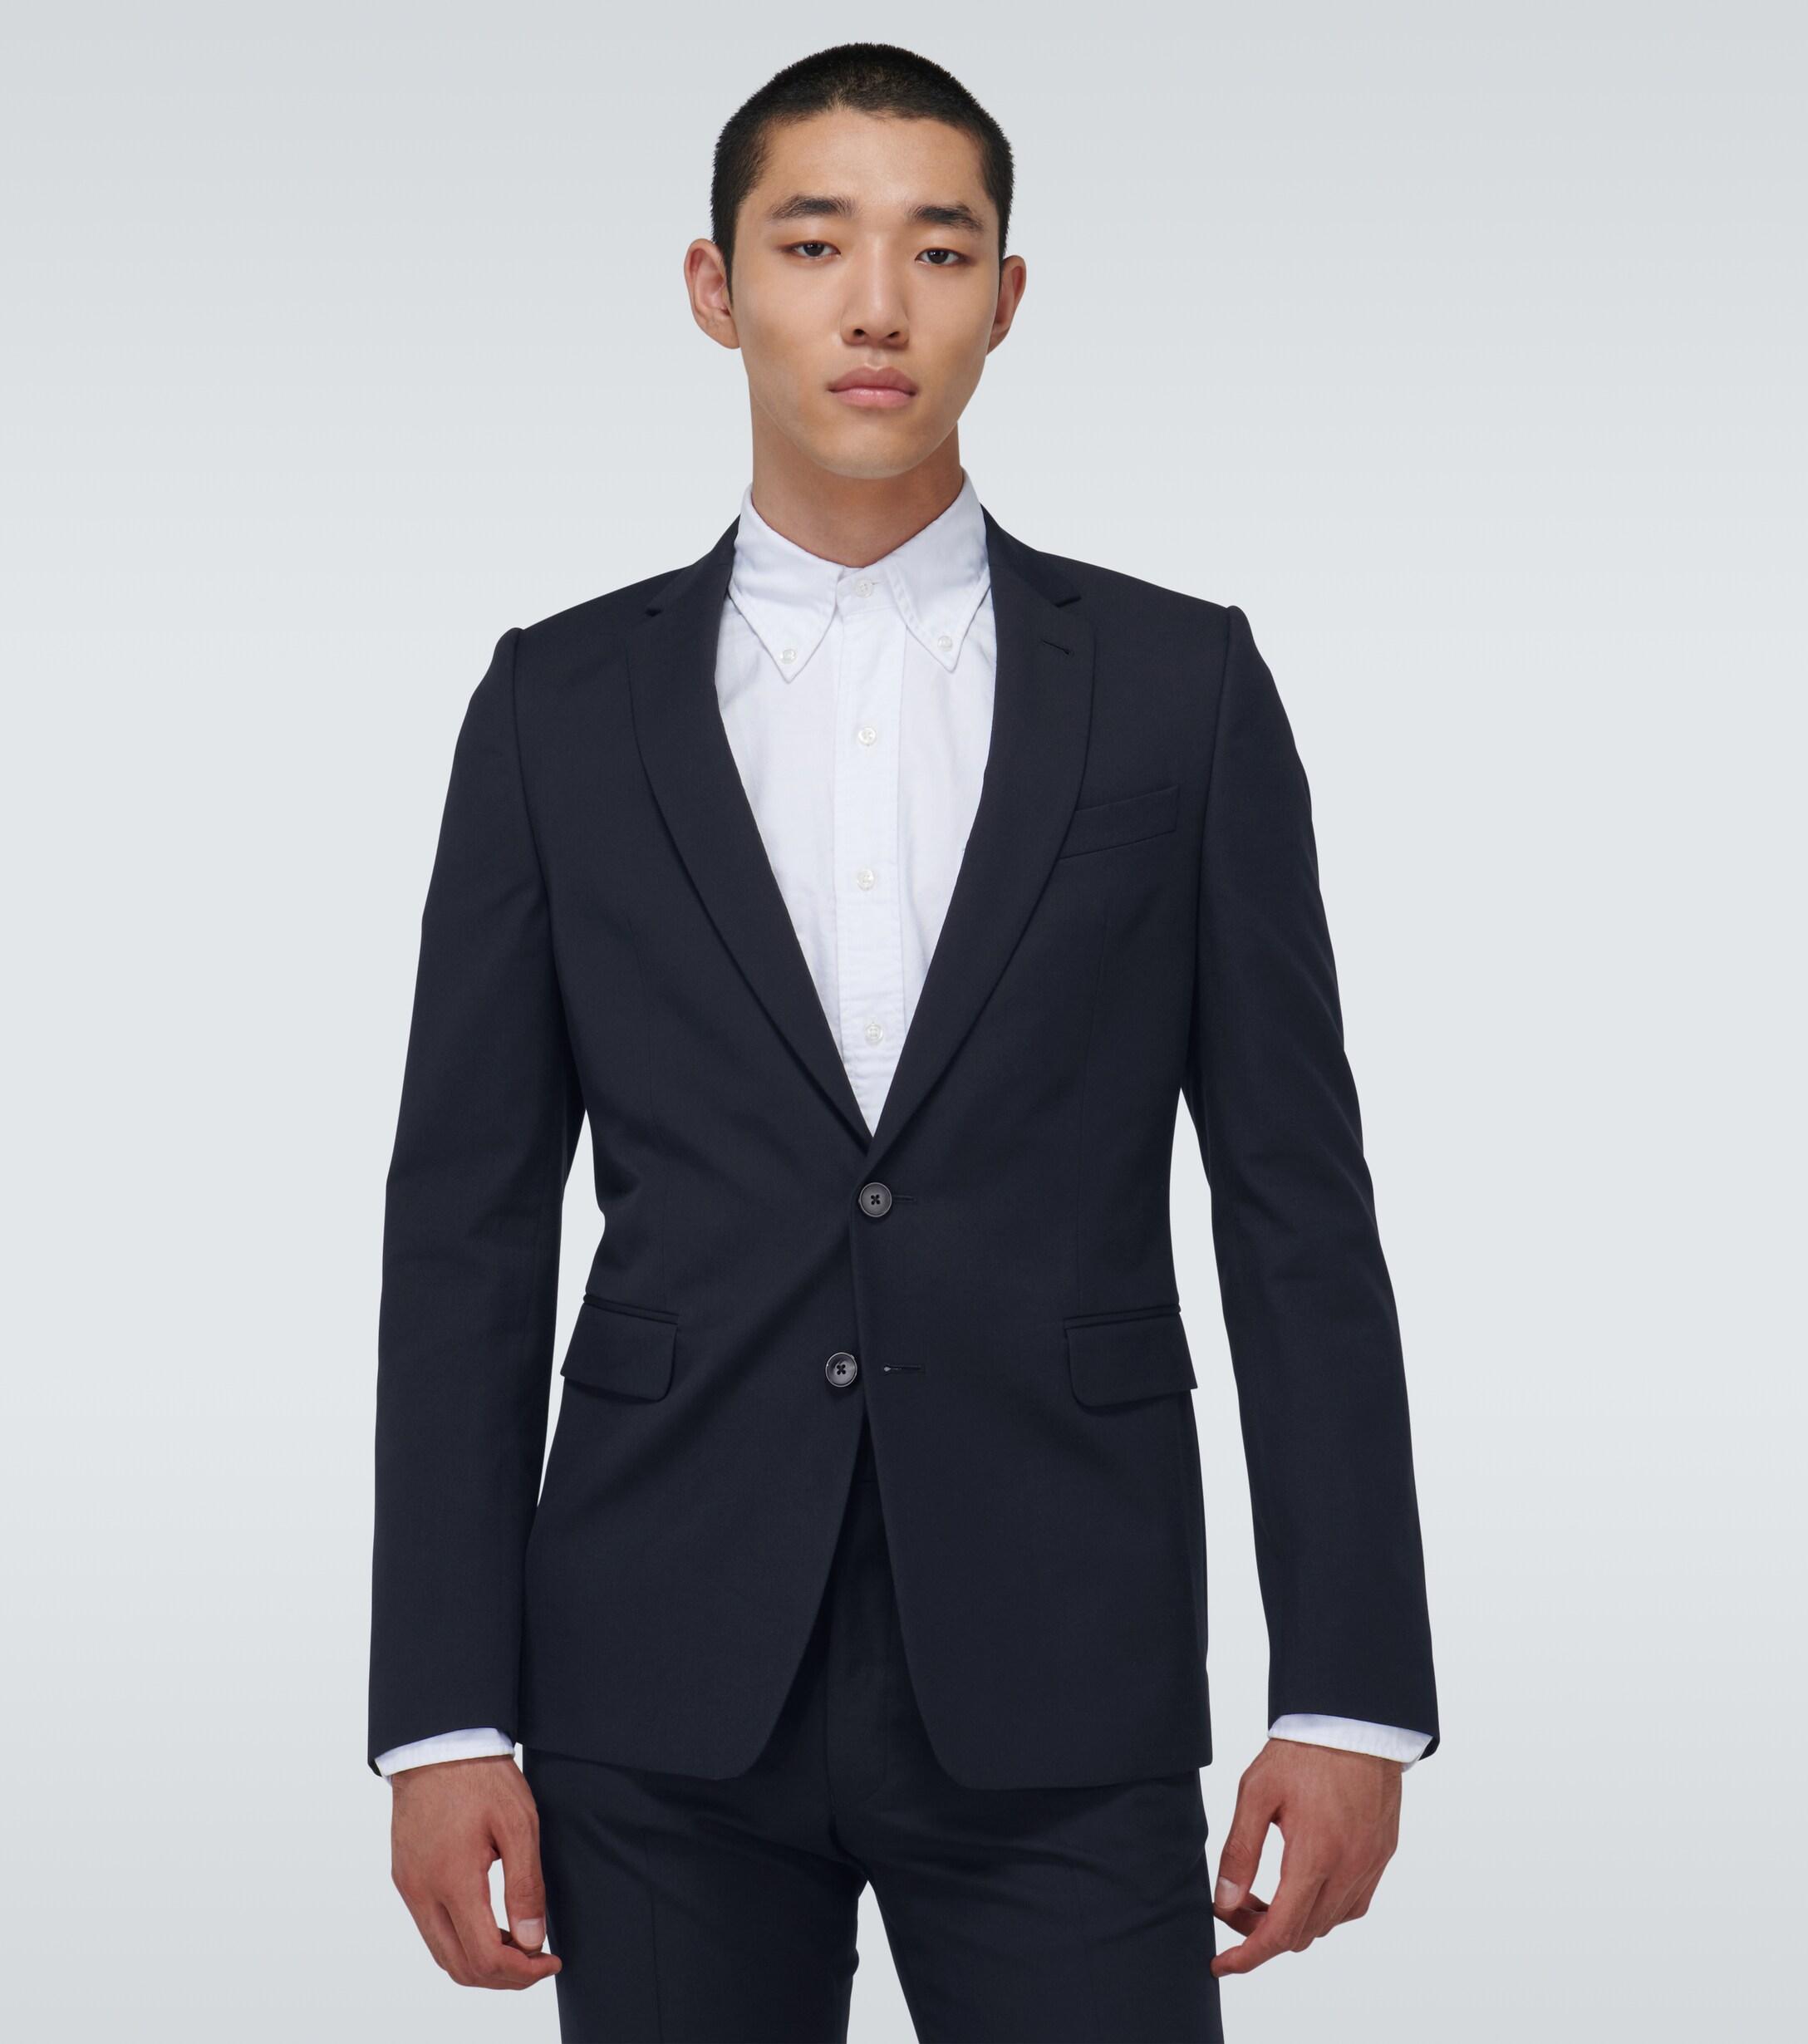 Dries Van Noten Cotton Single-breasted Suit in Blue for Men - Lyst